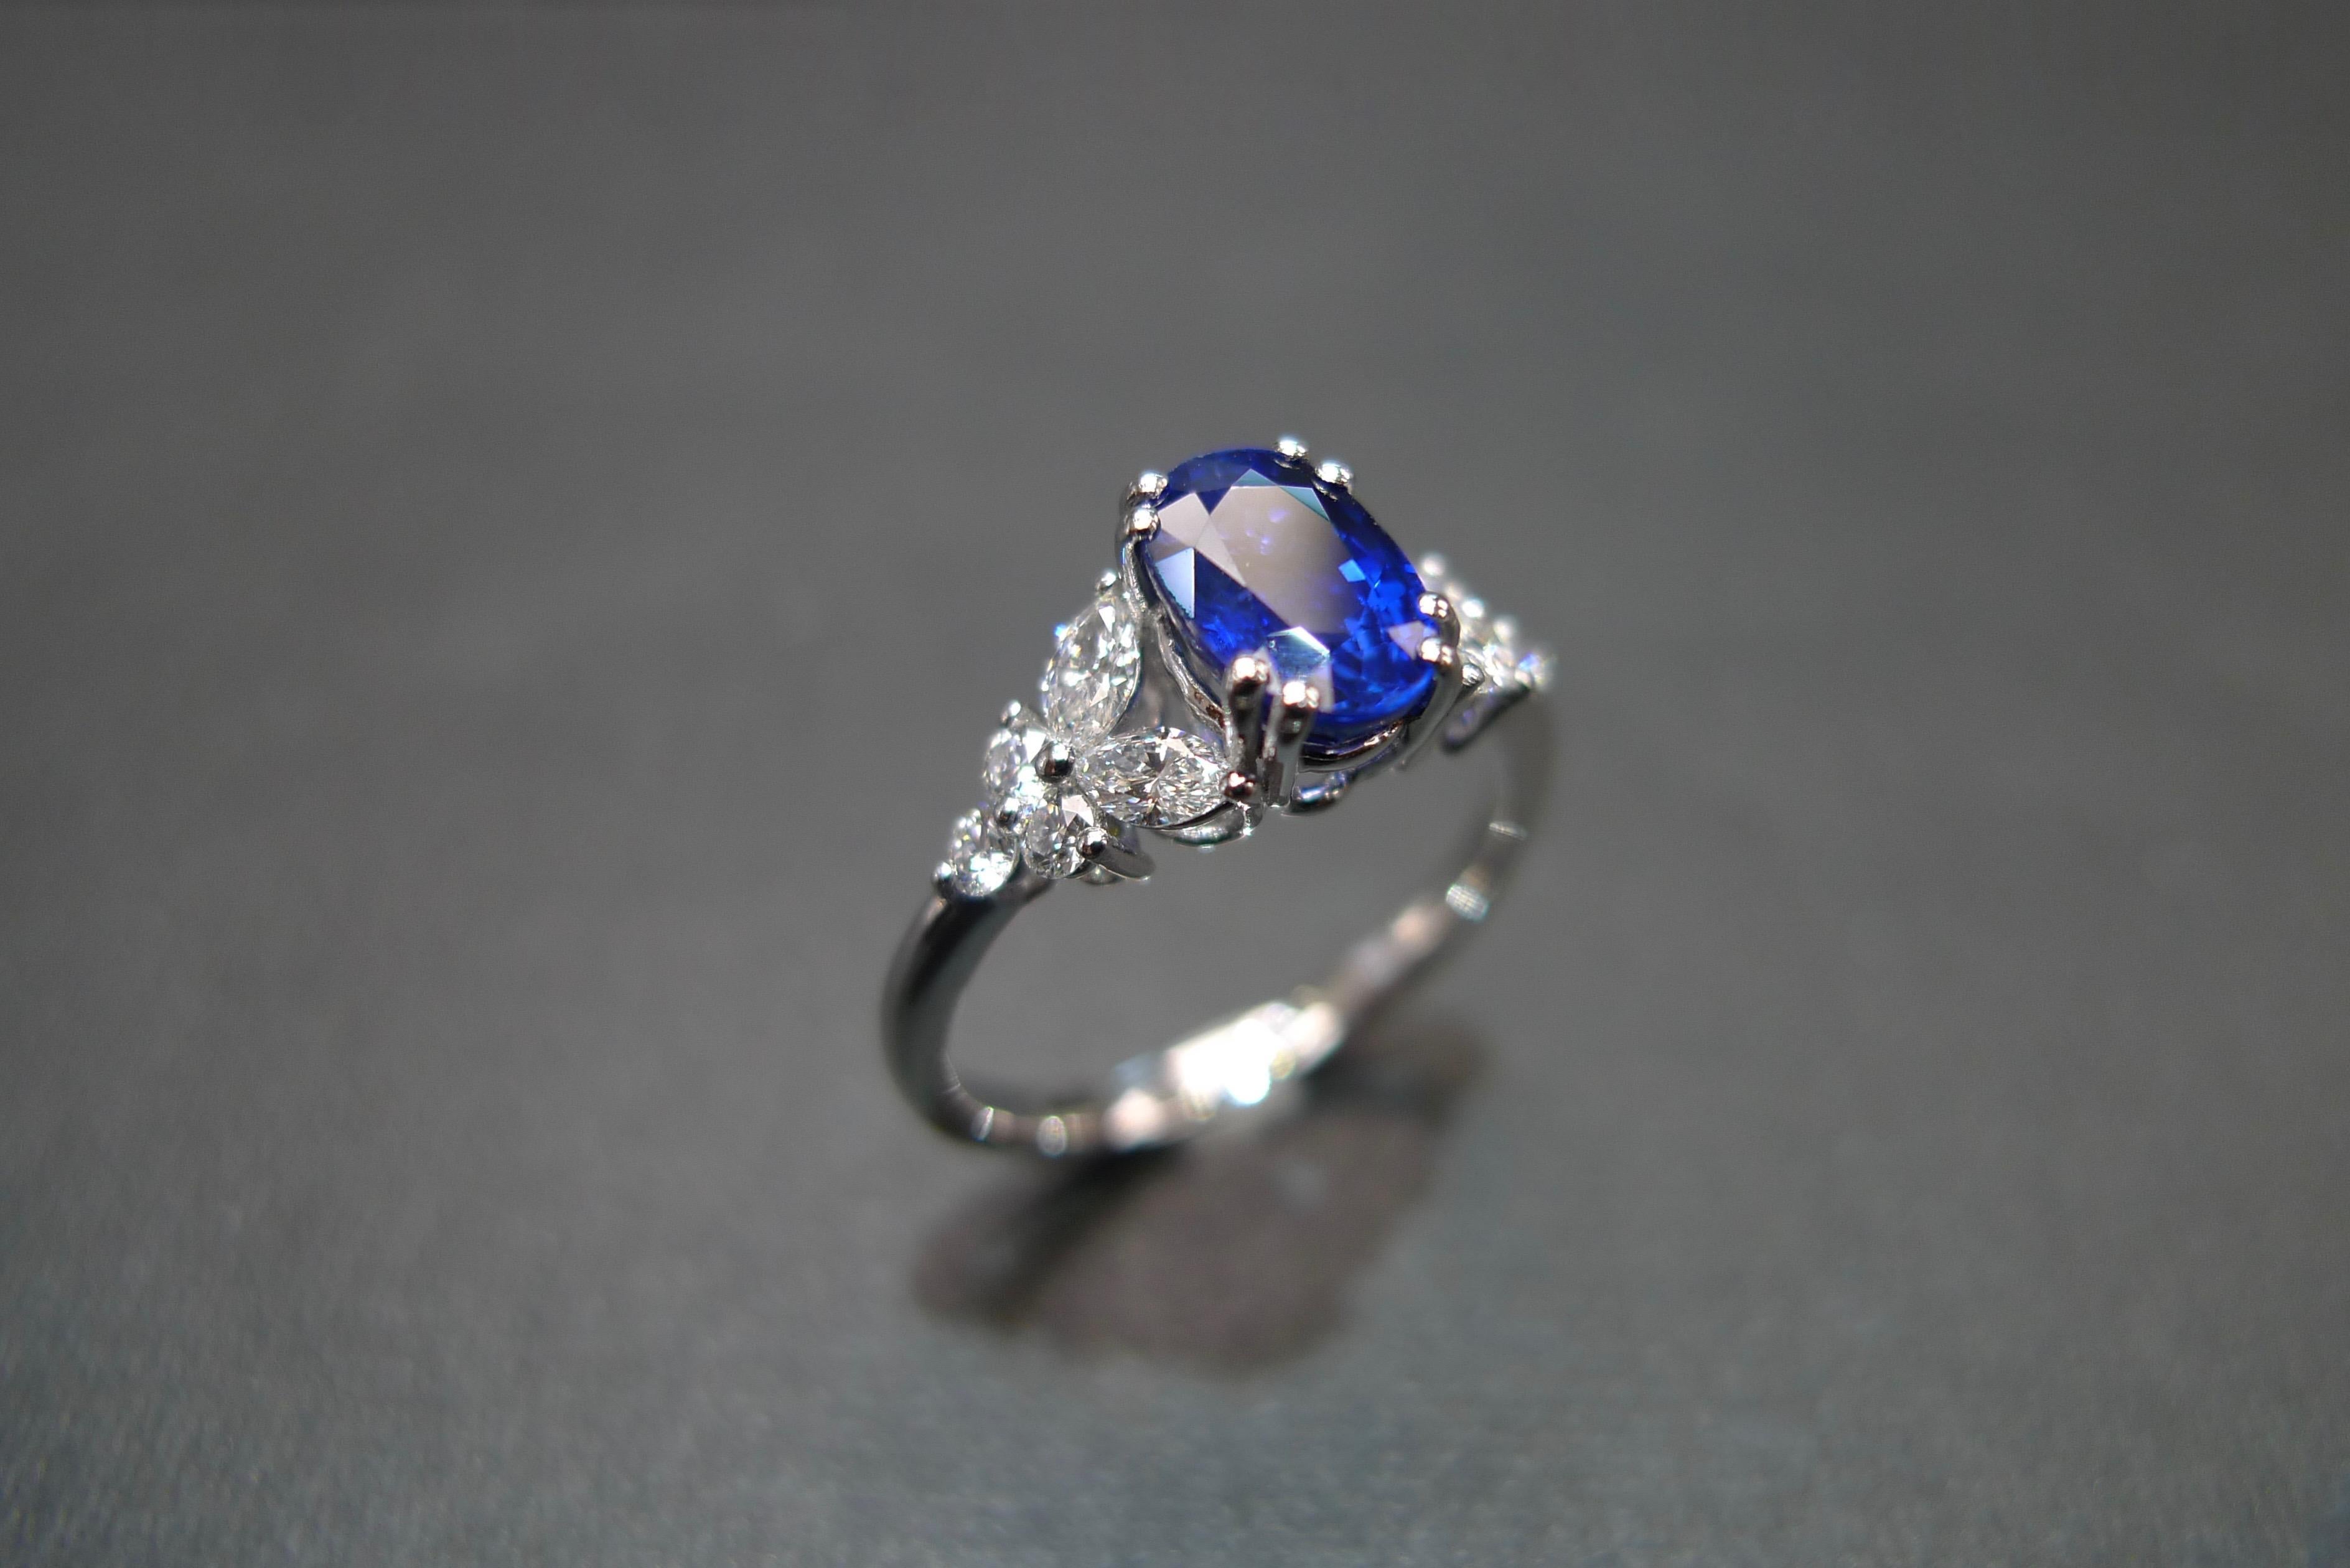 For Sale:  Blue Sapphire Engagement Ring with Marquise Cut Diamond in 18K White Gold 14